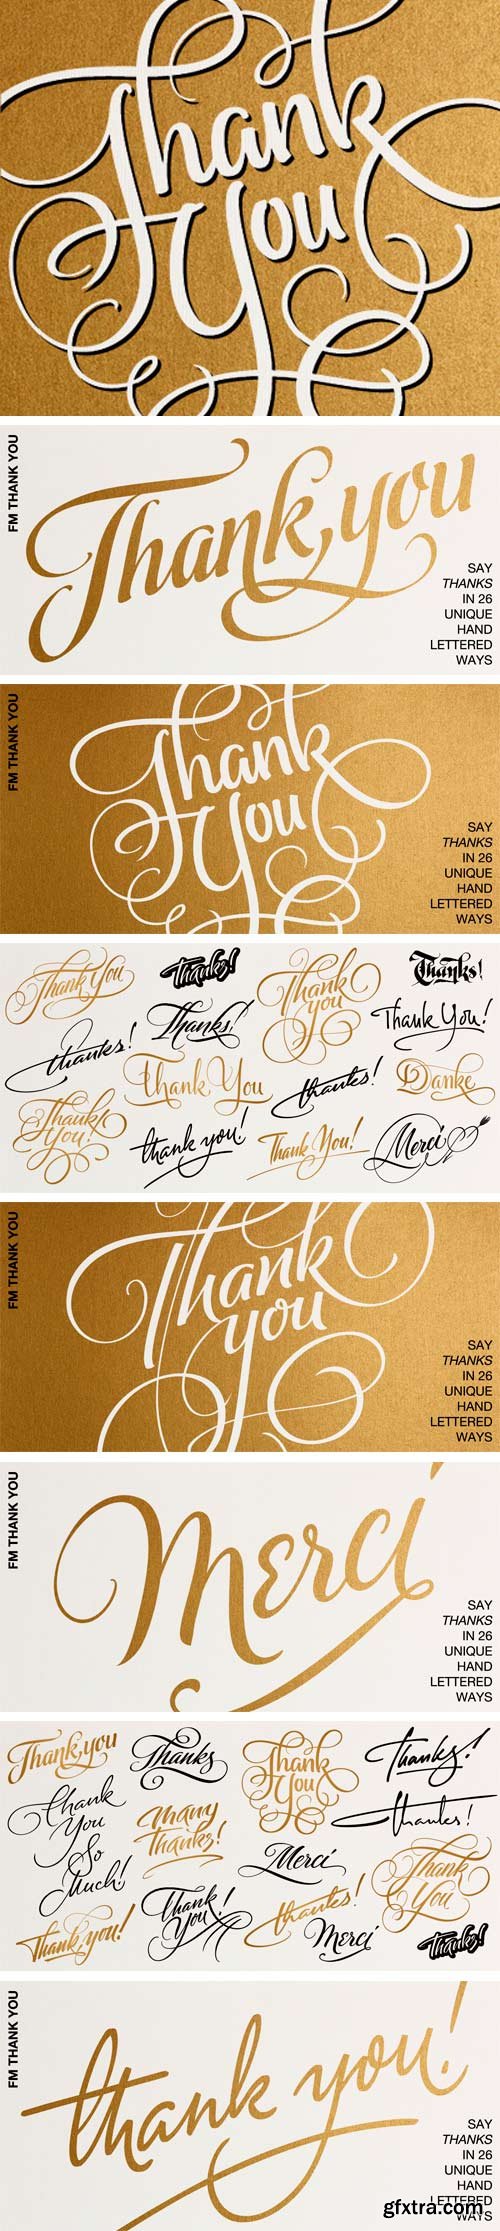 FM Thank You Font for $20